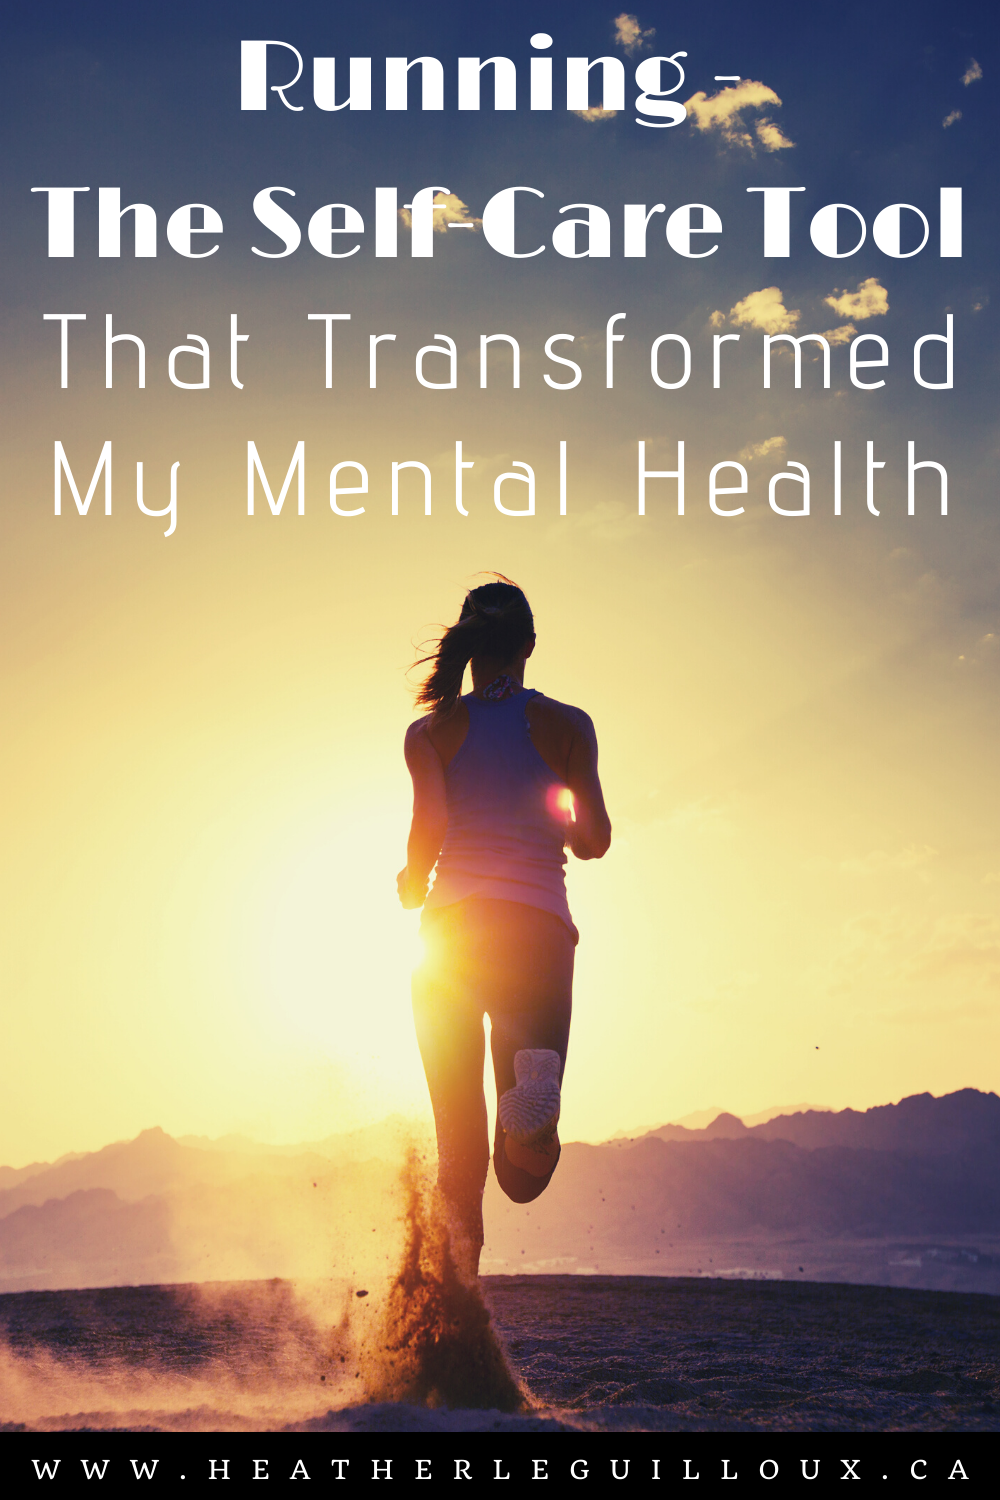 Running always made me feel better if I was having a rough day. Running can control stress and improve the body's ability to deal with mental tension. The chemicals released during and after runs can help people with anxiety feel calmer. Learn more about how running can help your mental health in this guest article on the blog! #running #mentalhealth #runforhealth